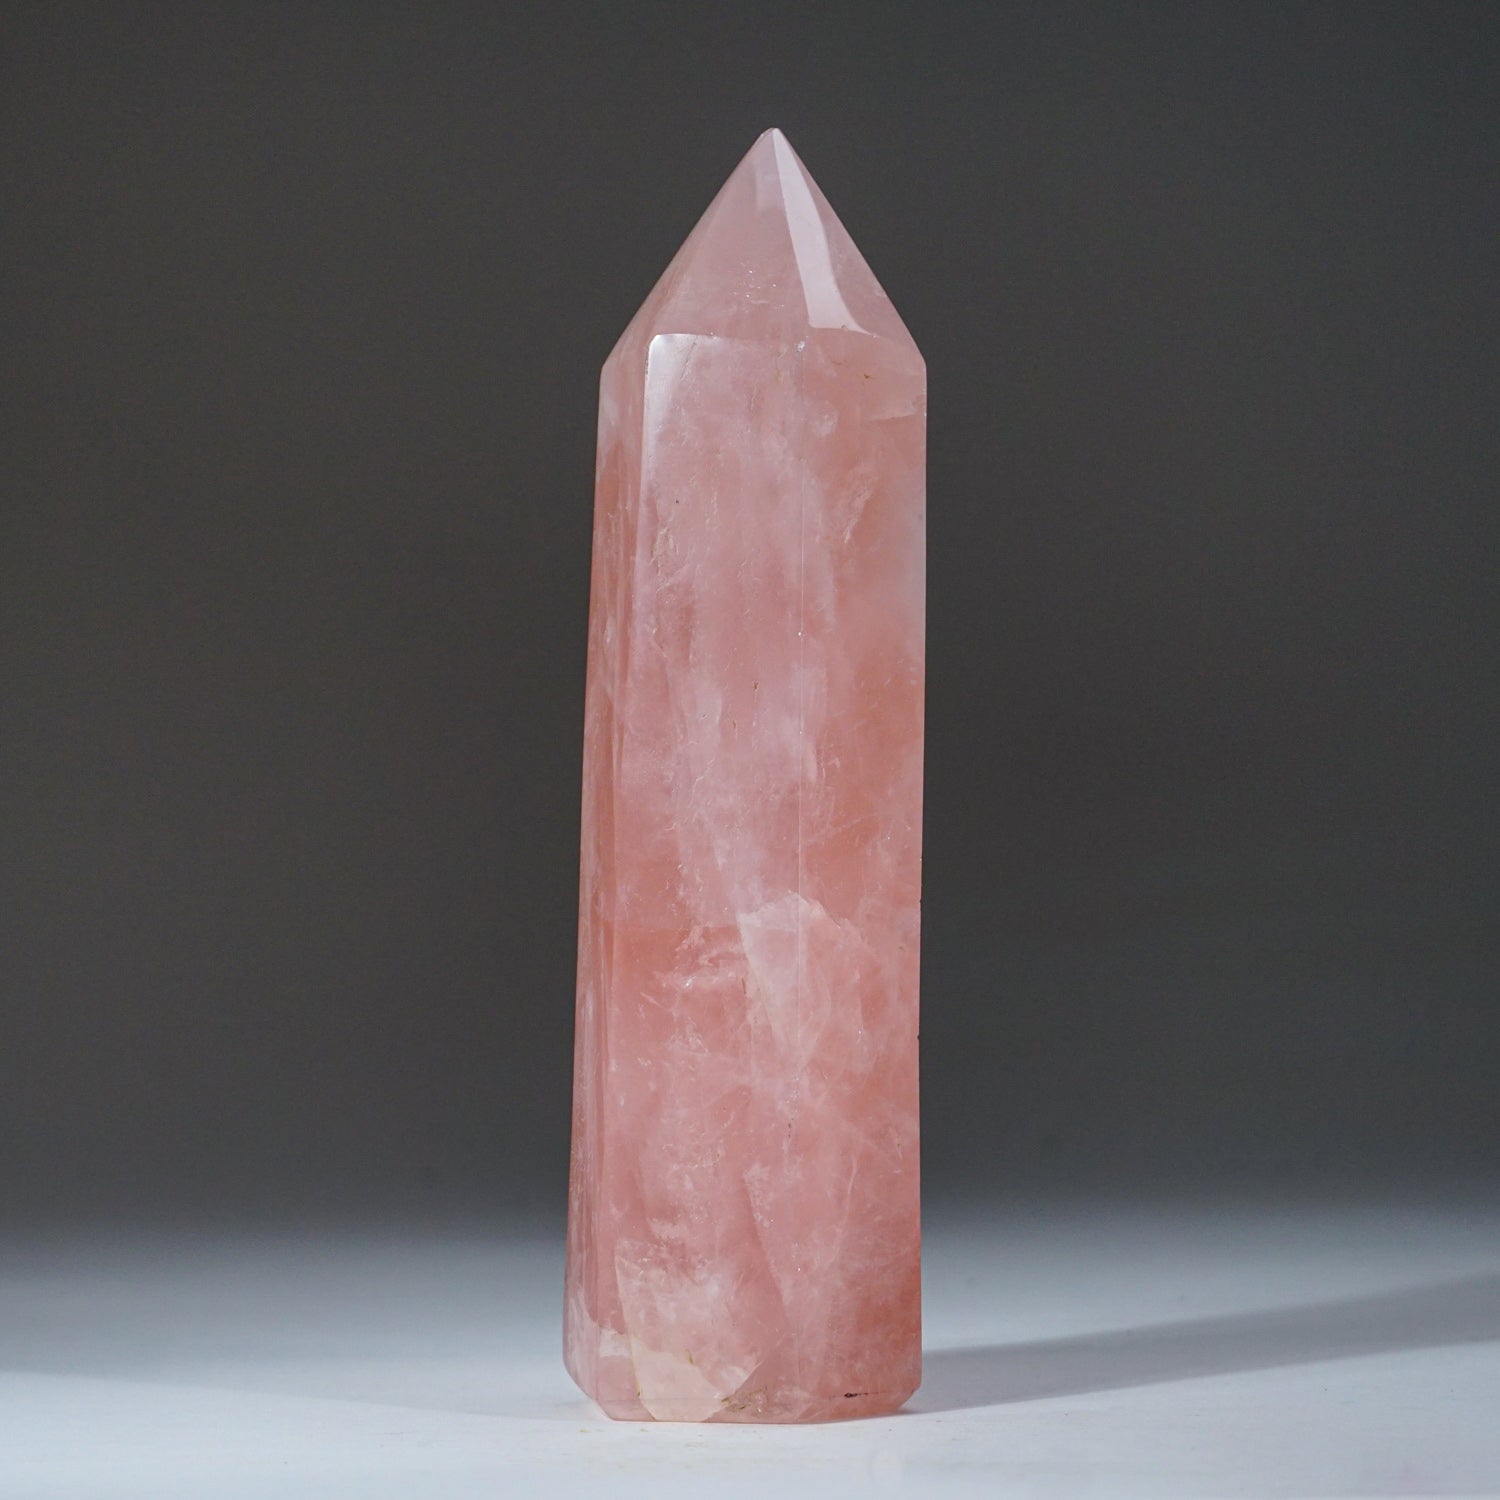 Genuine Rose Quartz Polished Point from Brazil (2.3 lbs)